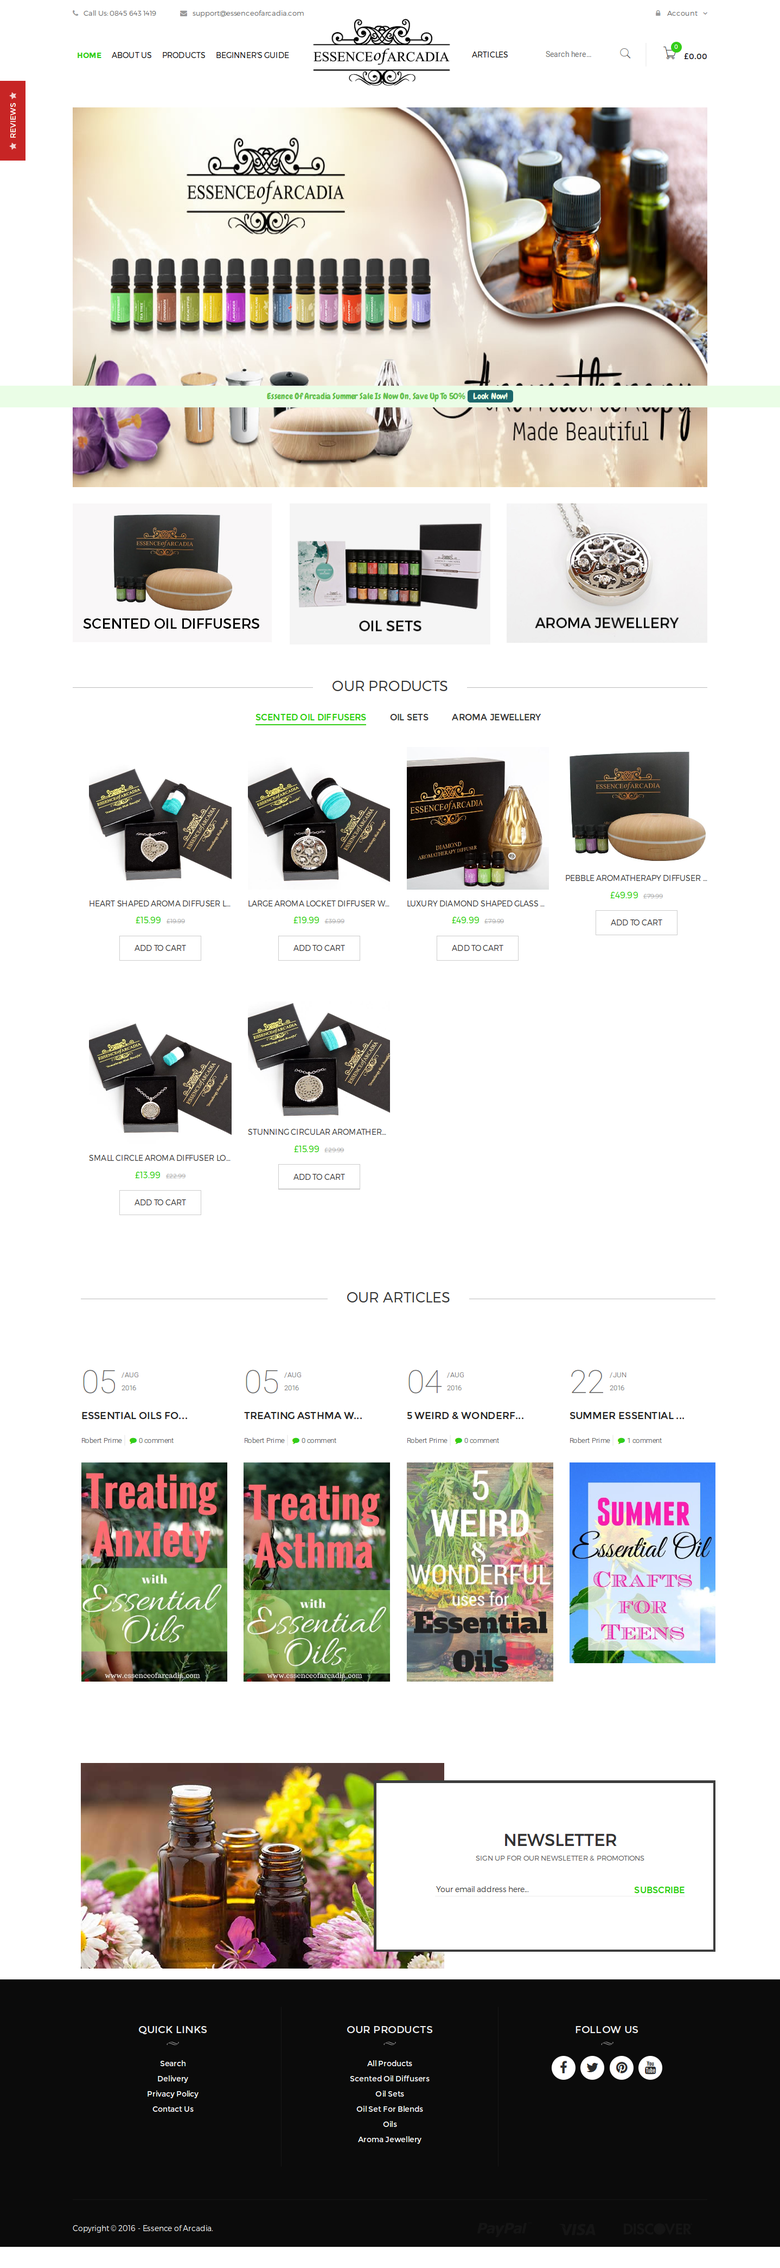 SHOPIFY SITE DESING FROM SCRATCH